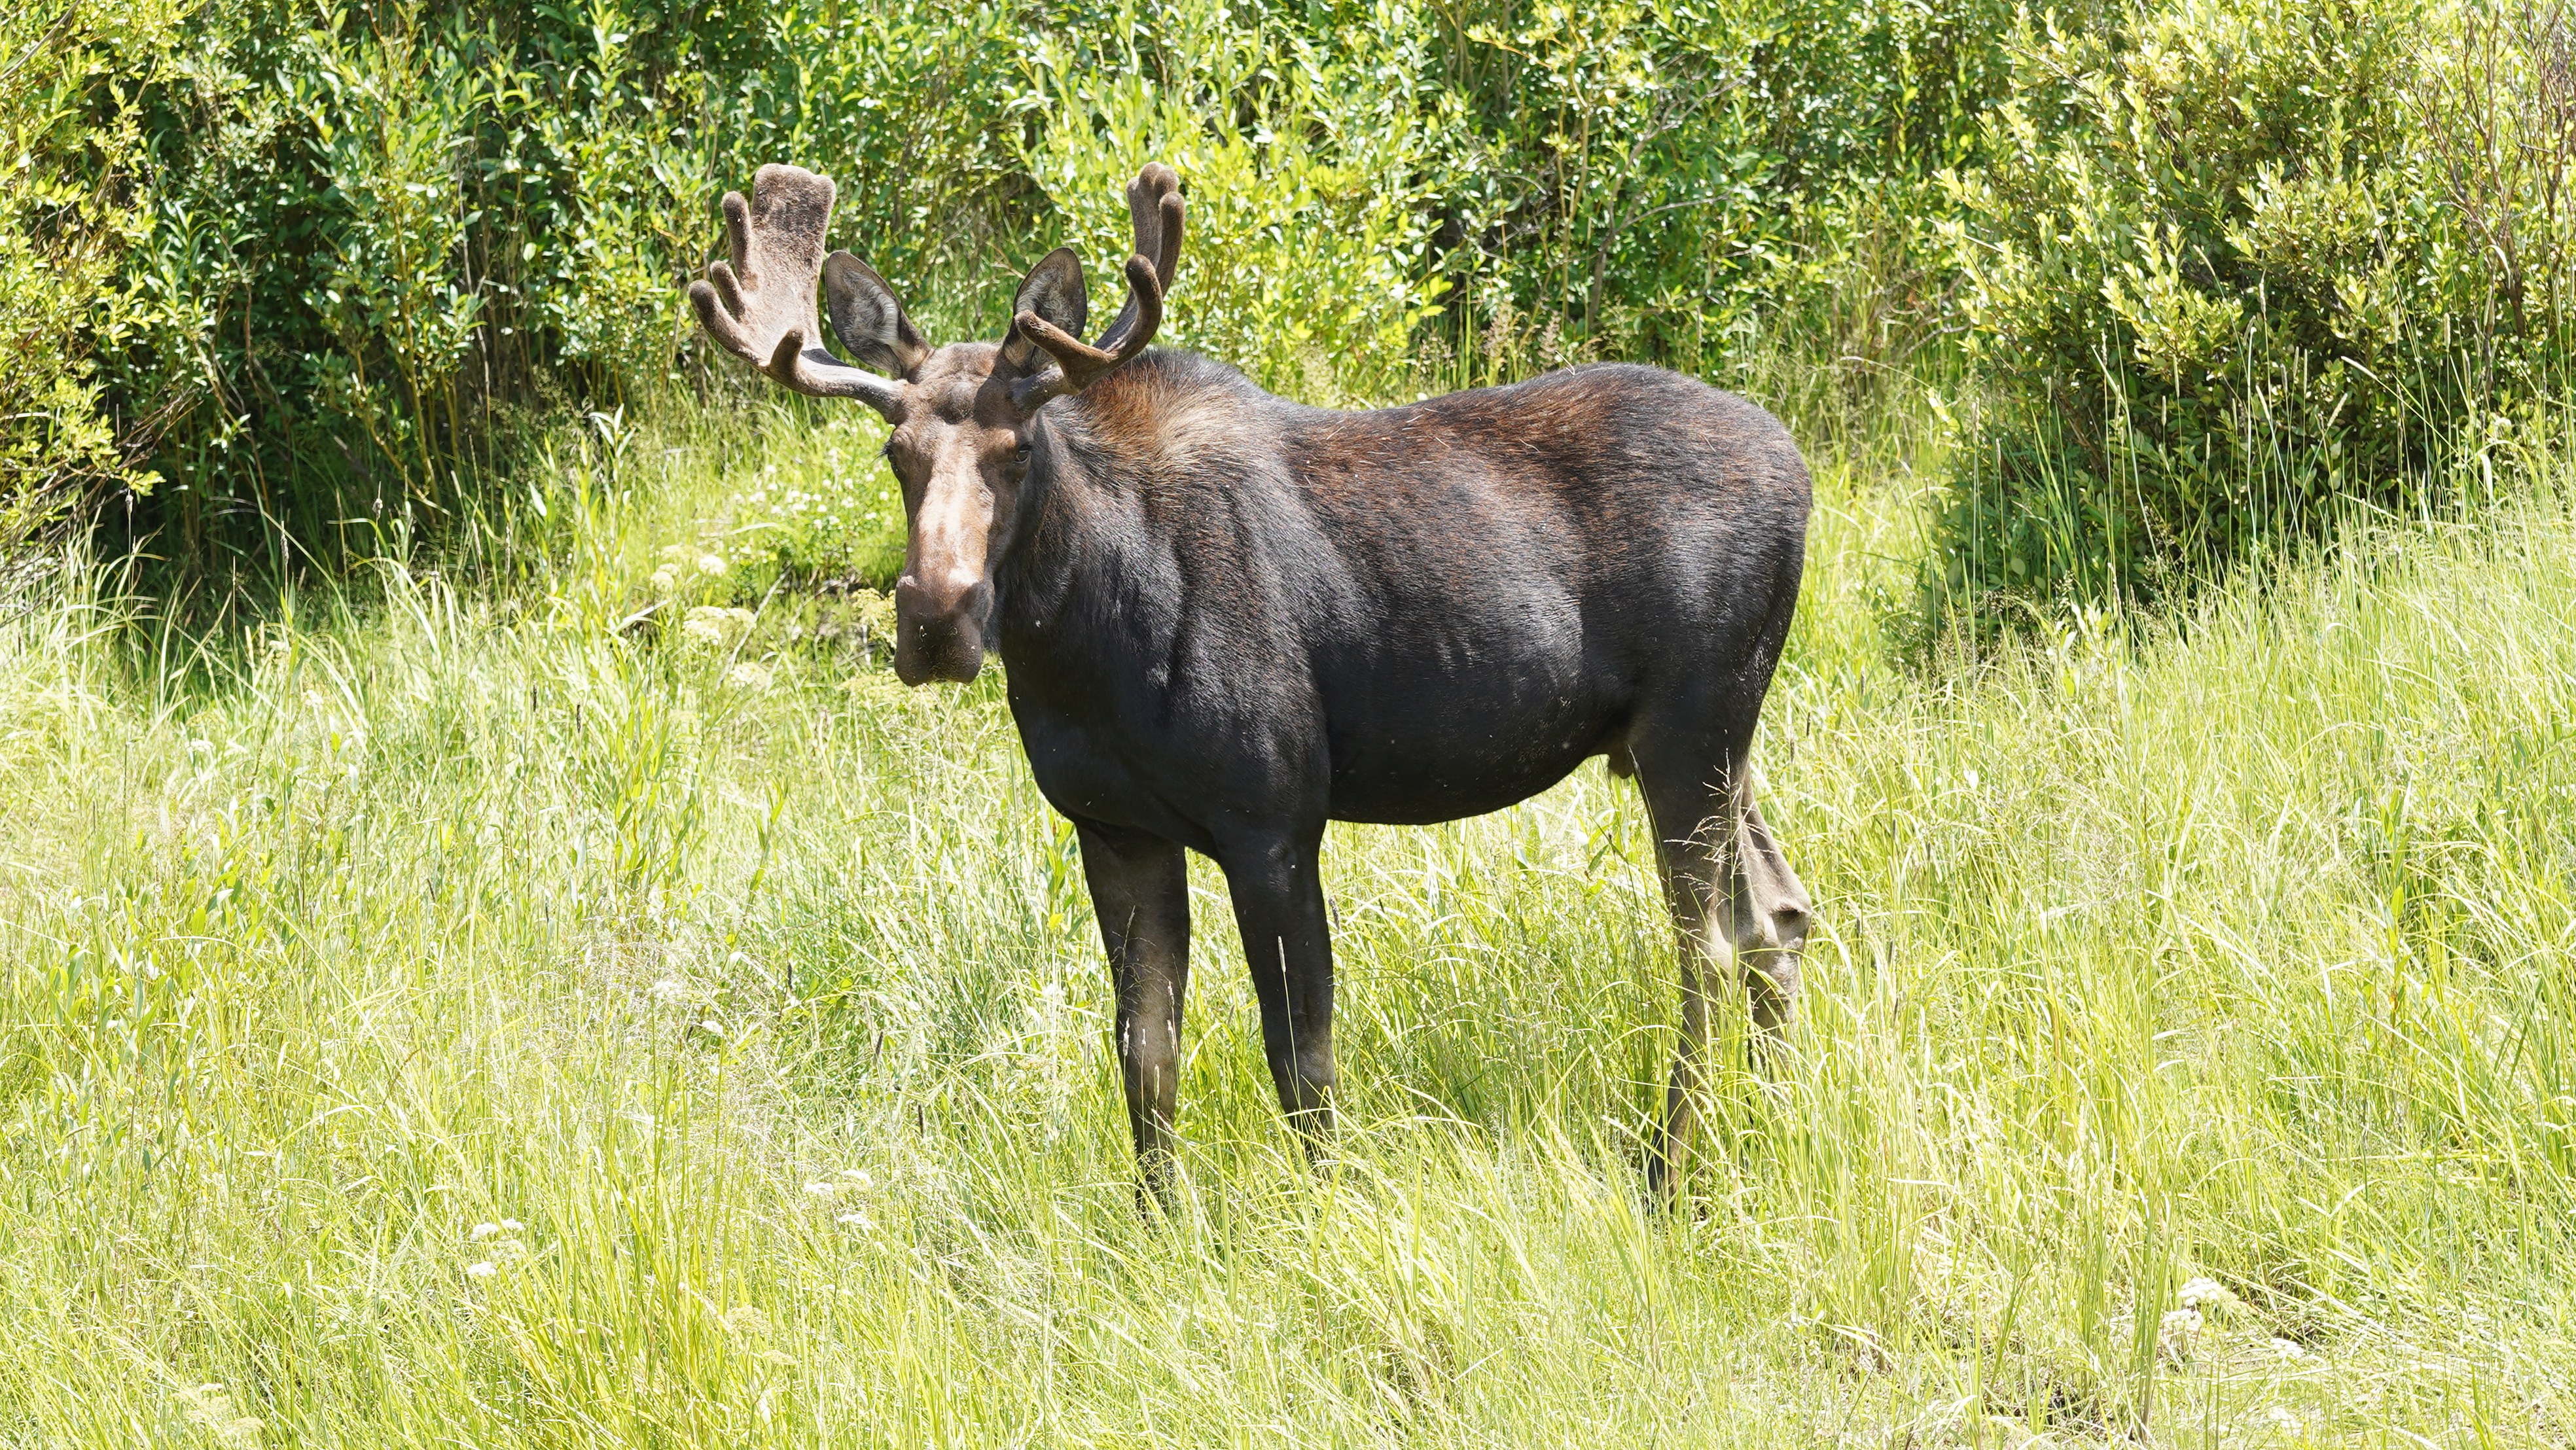 A male moose standing in tall grass during the daytime - North Park, Jackson County Colorado